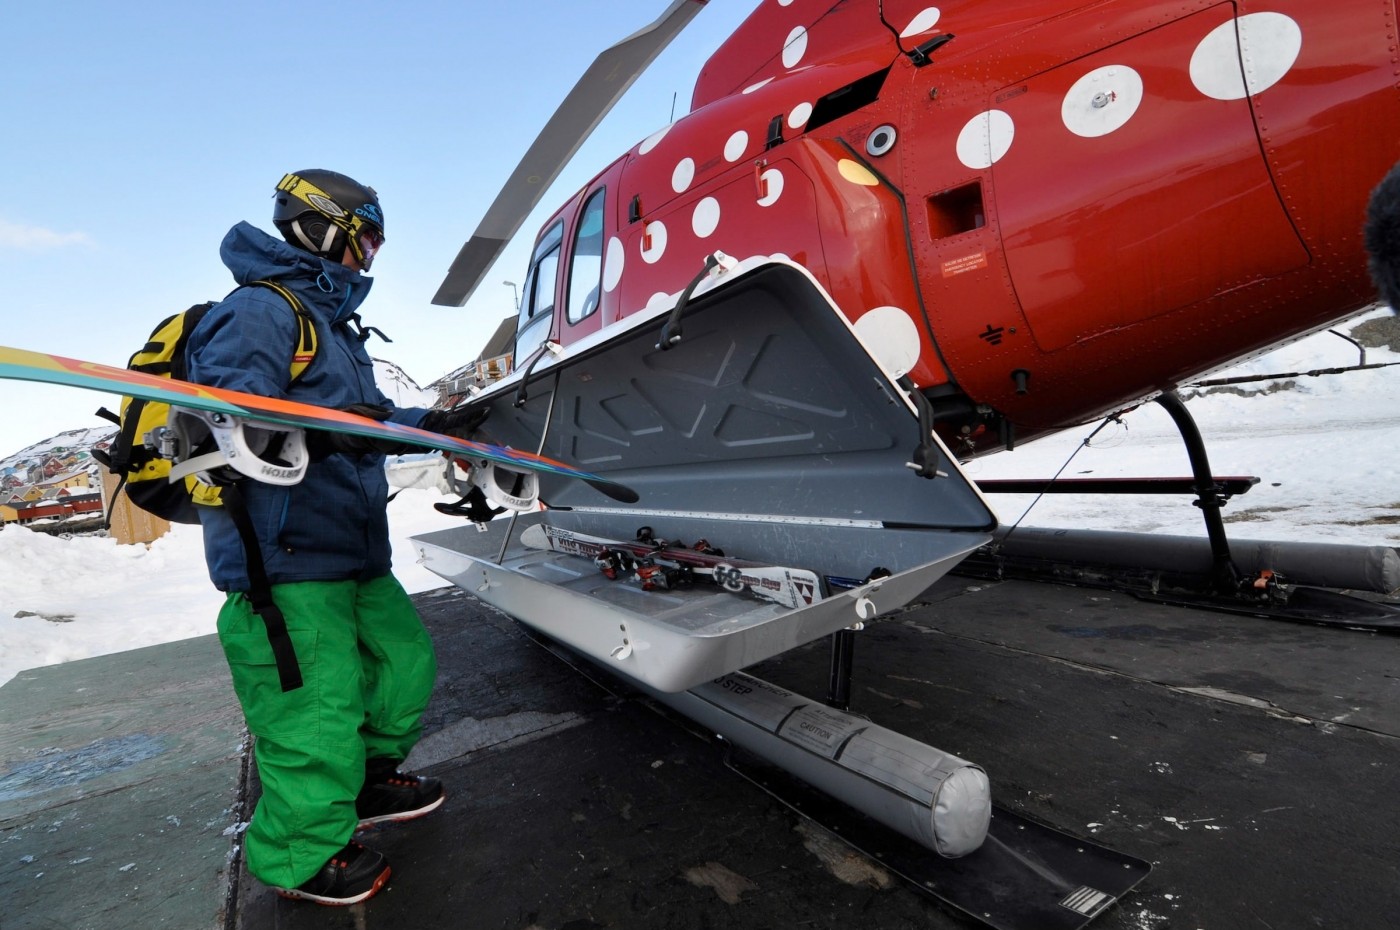 Helicopter ski luggage. Photo by Mads Pihl - Visit Greenland